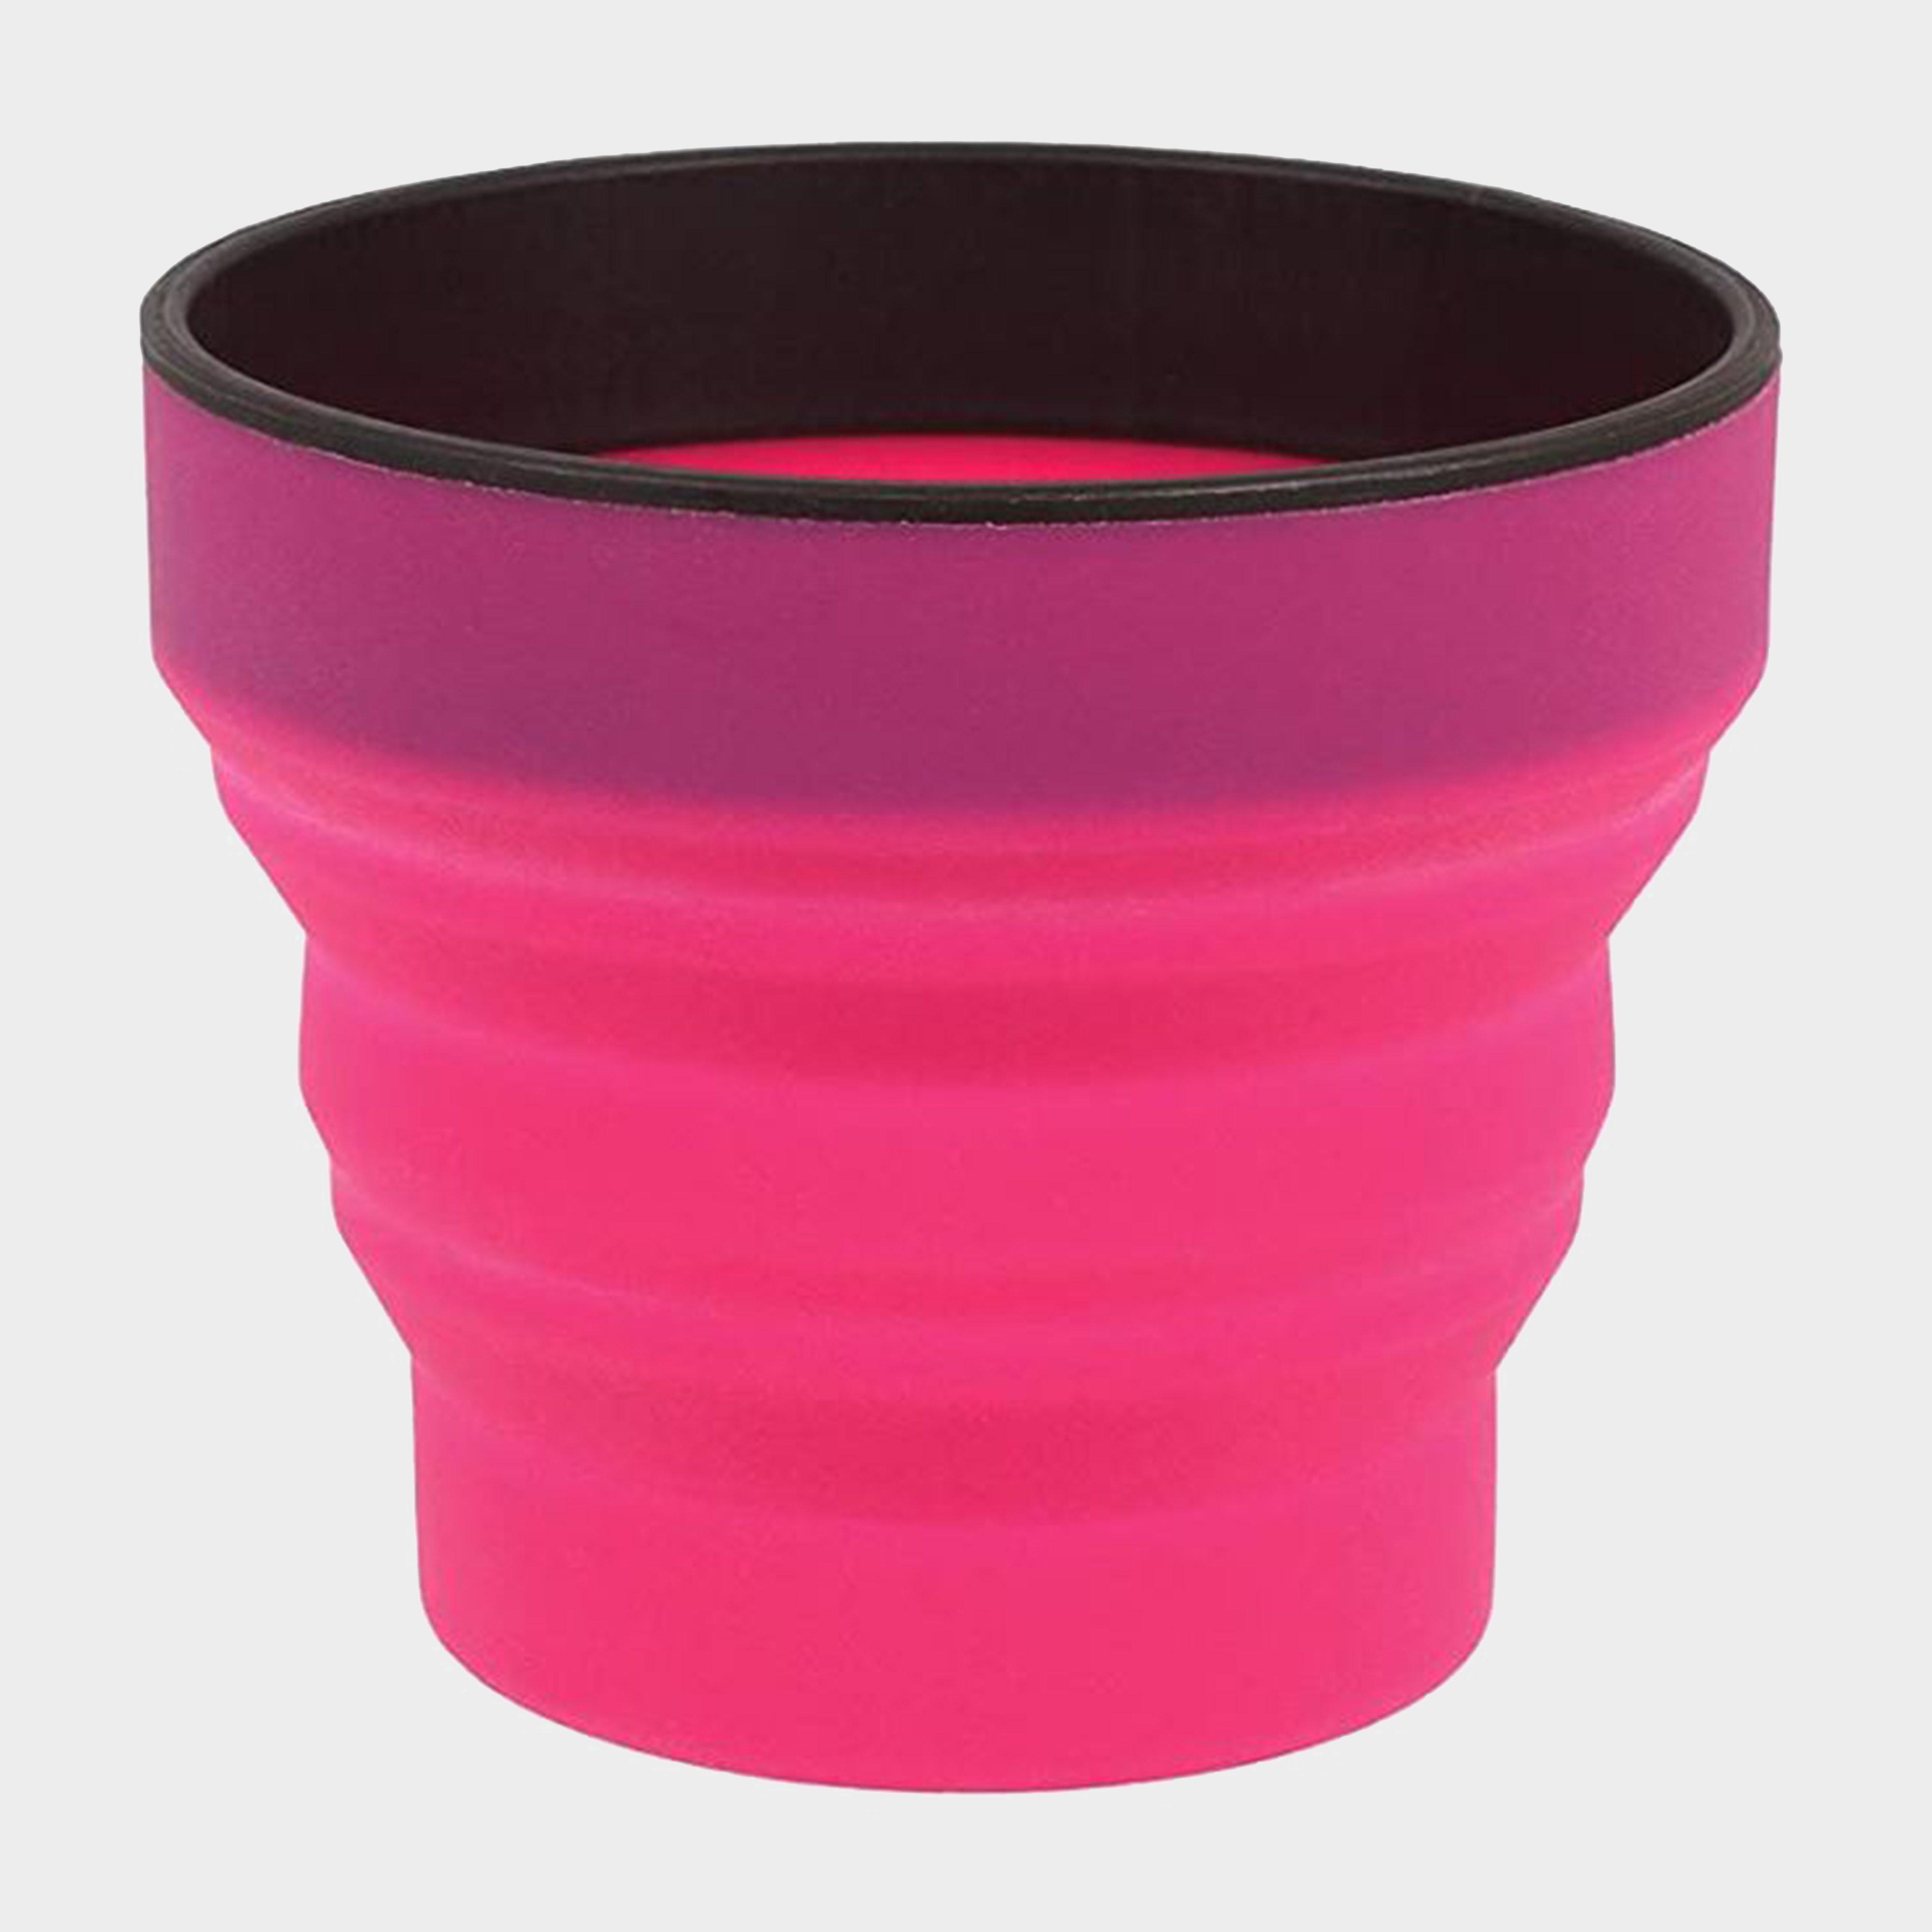 Lifeventure Ellipse Collapsible Cup  Pink